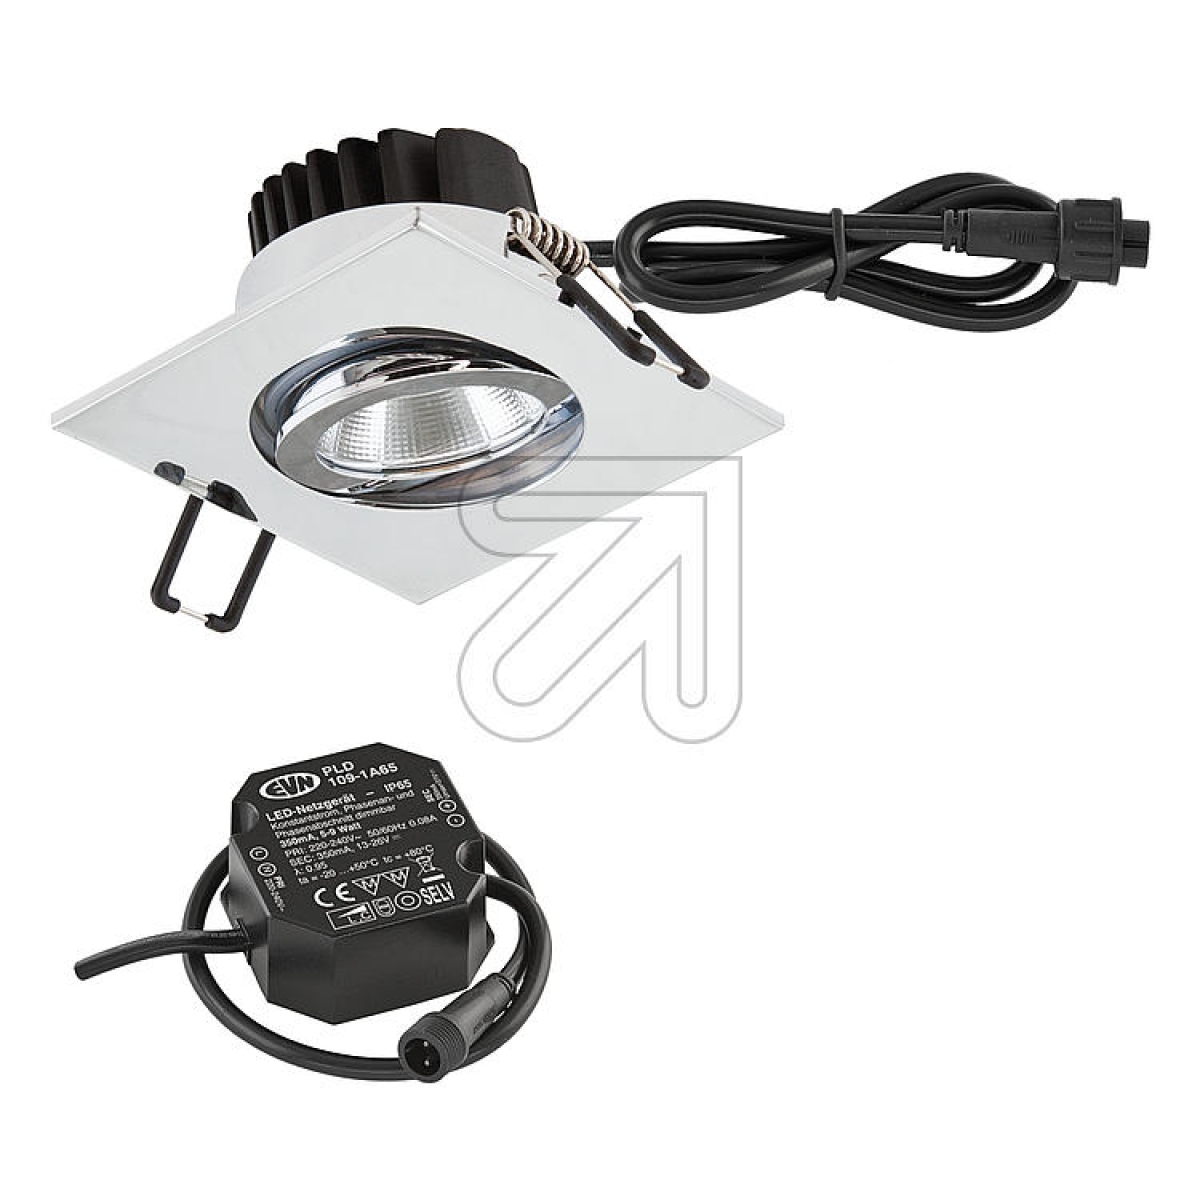 EVNLED recessed light chrome IP65 3000K 8.4W PC654N91102Article-No: 686555